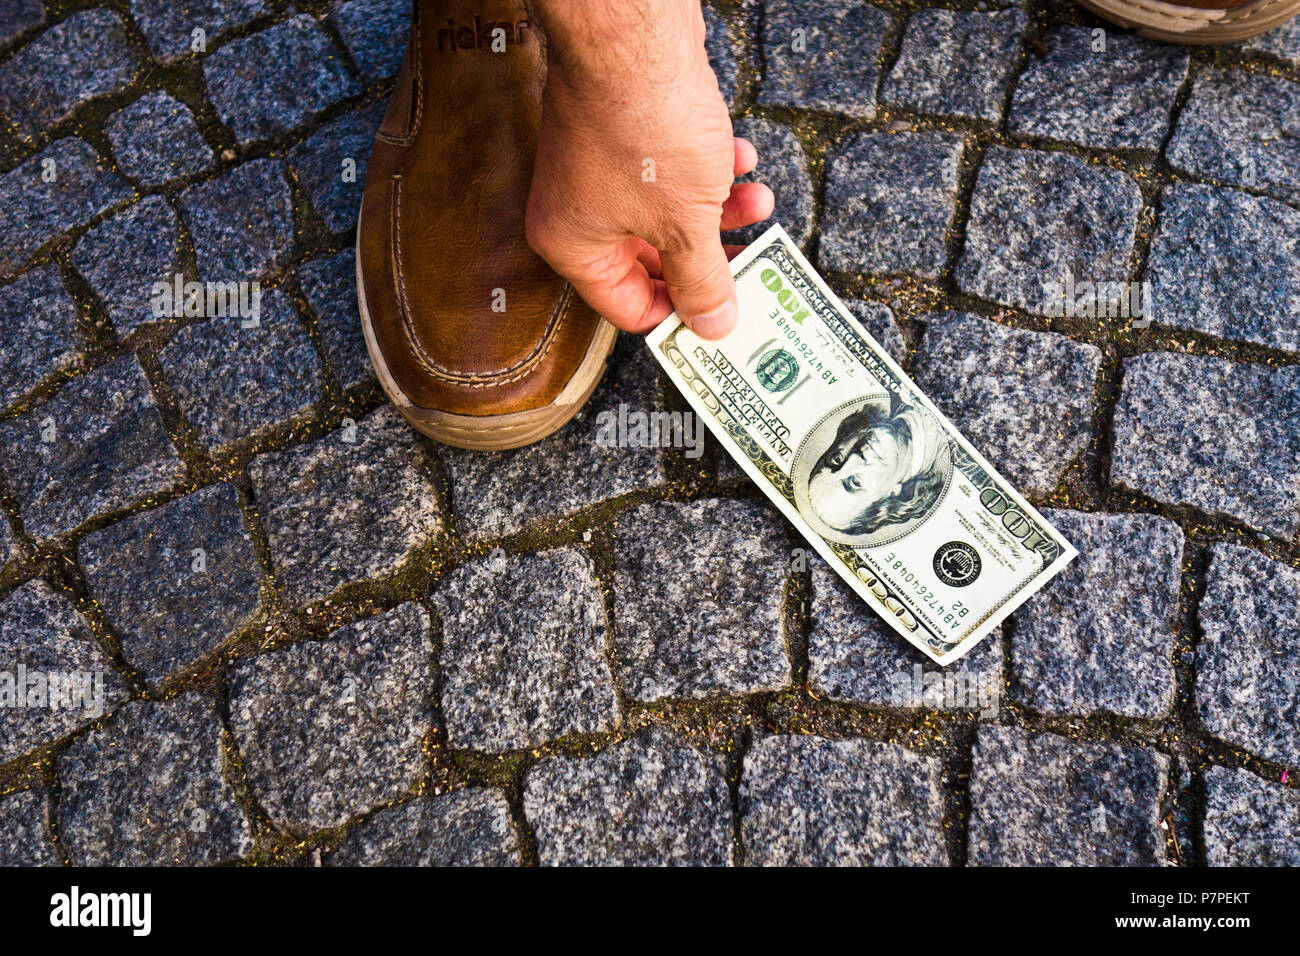 Finding money on the ground